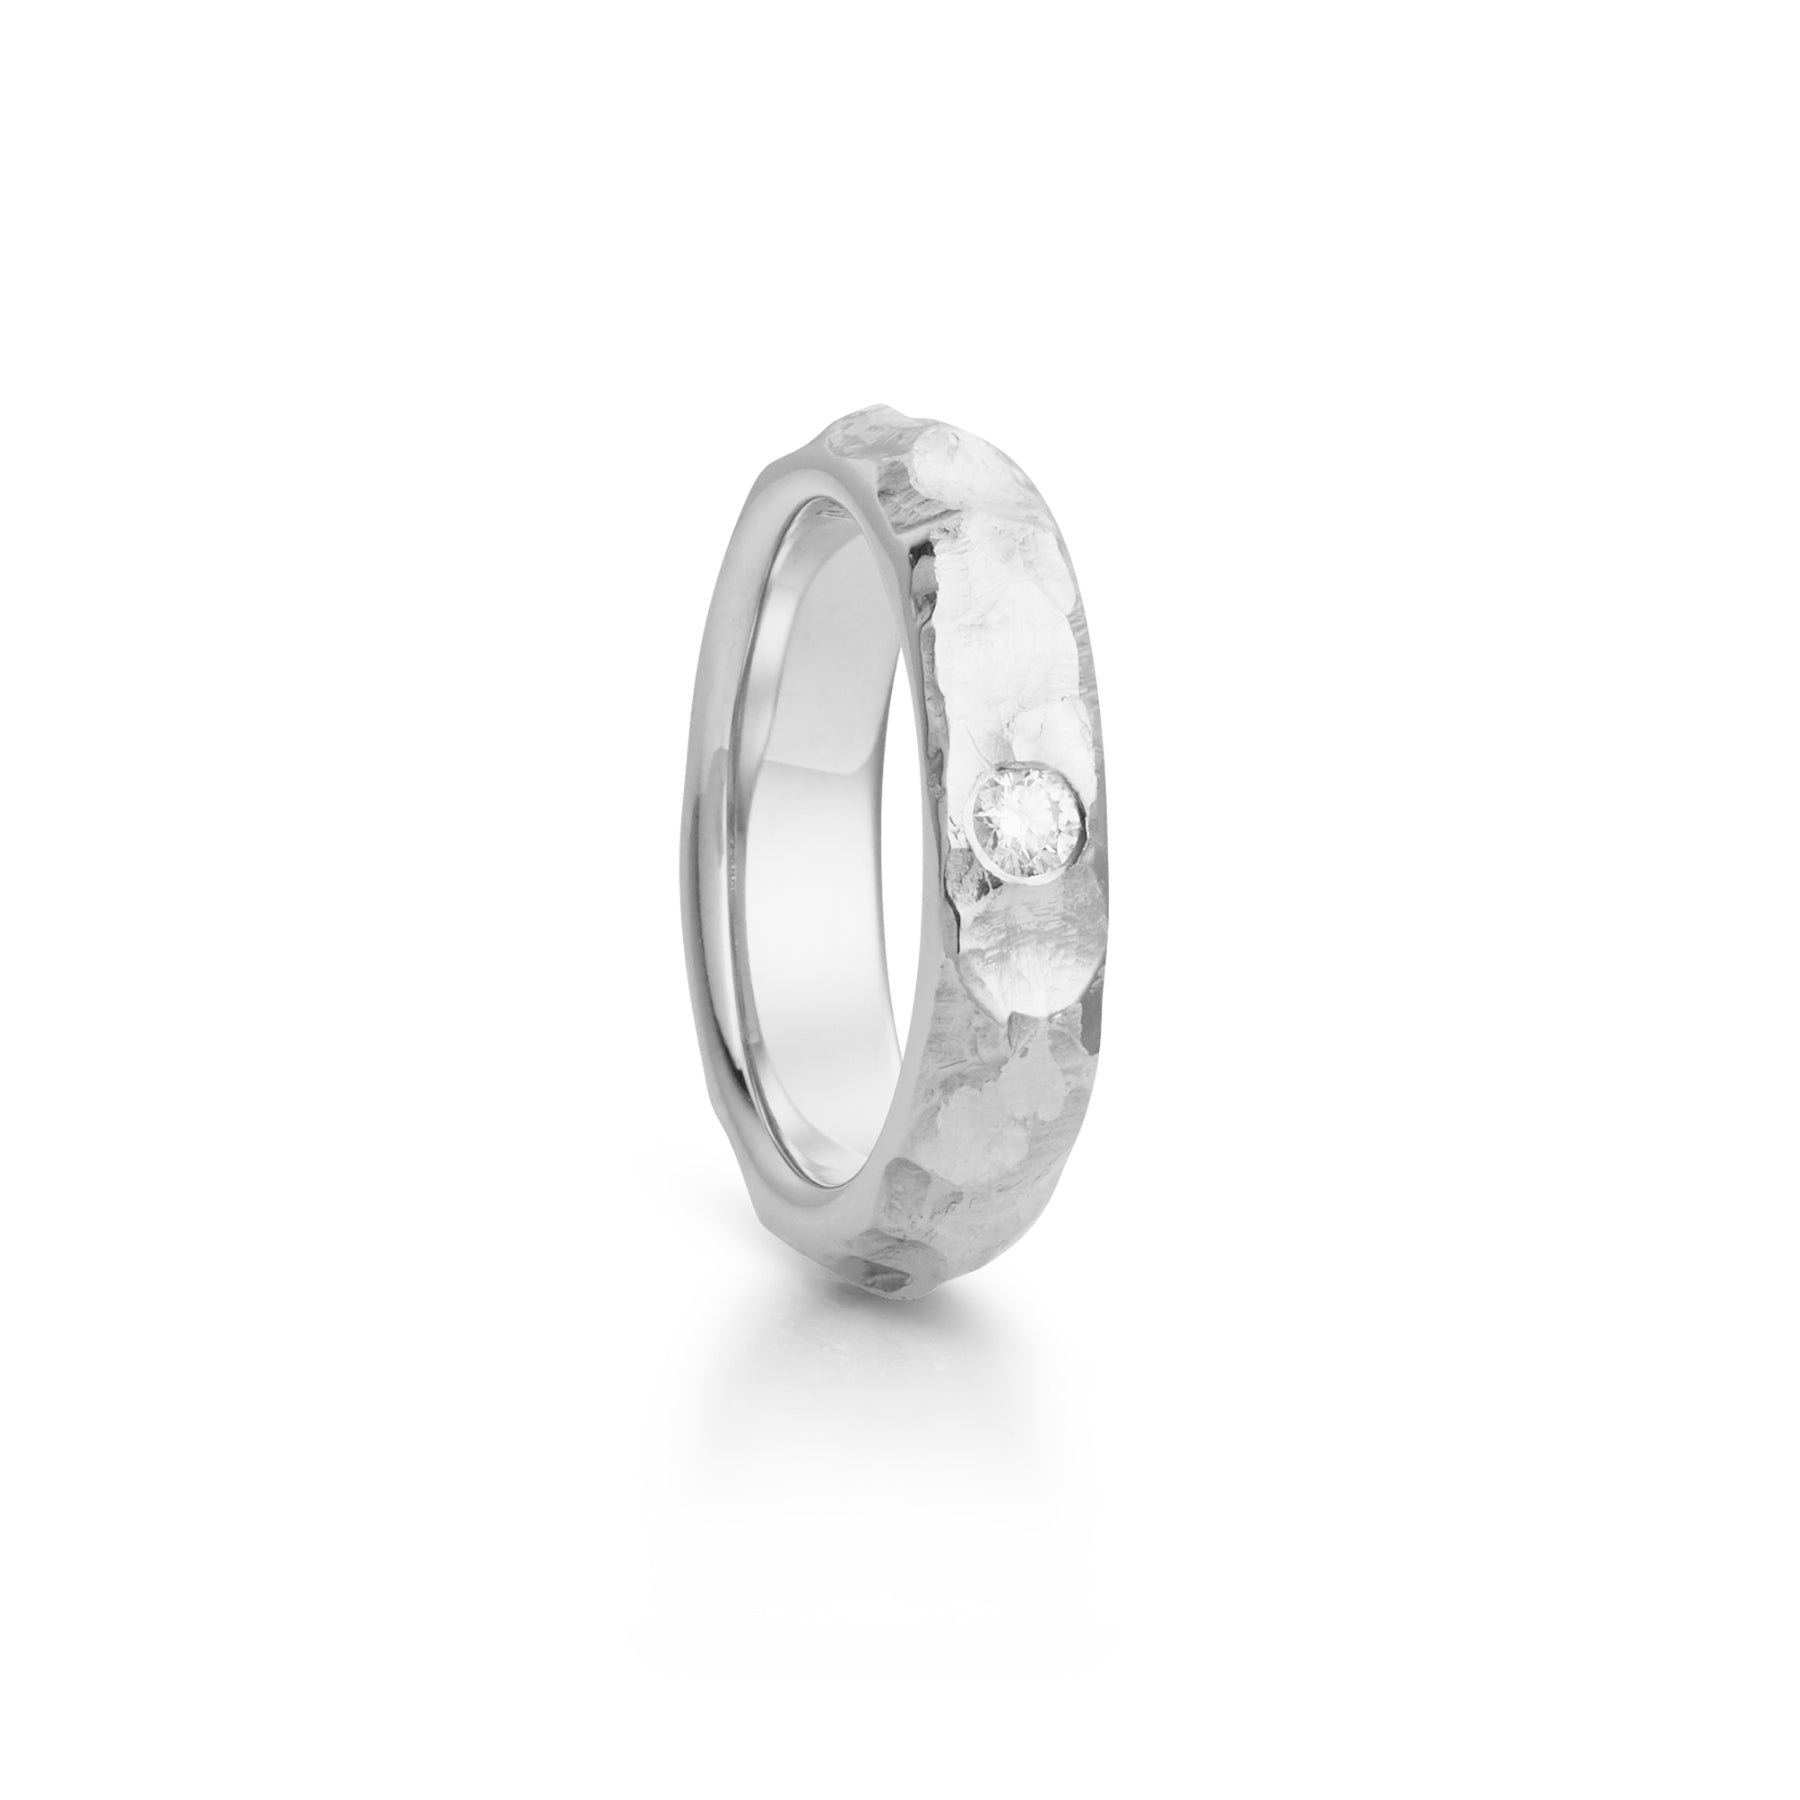 Fjell ring in white gold with diamond, lady